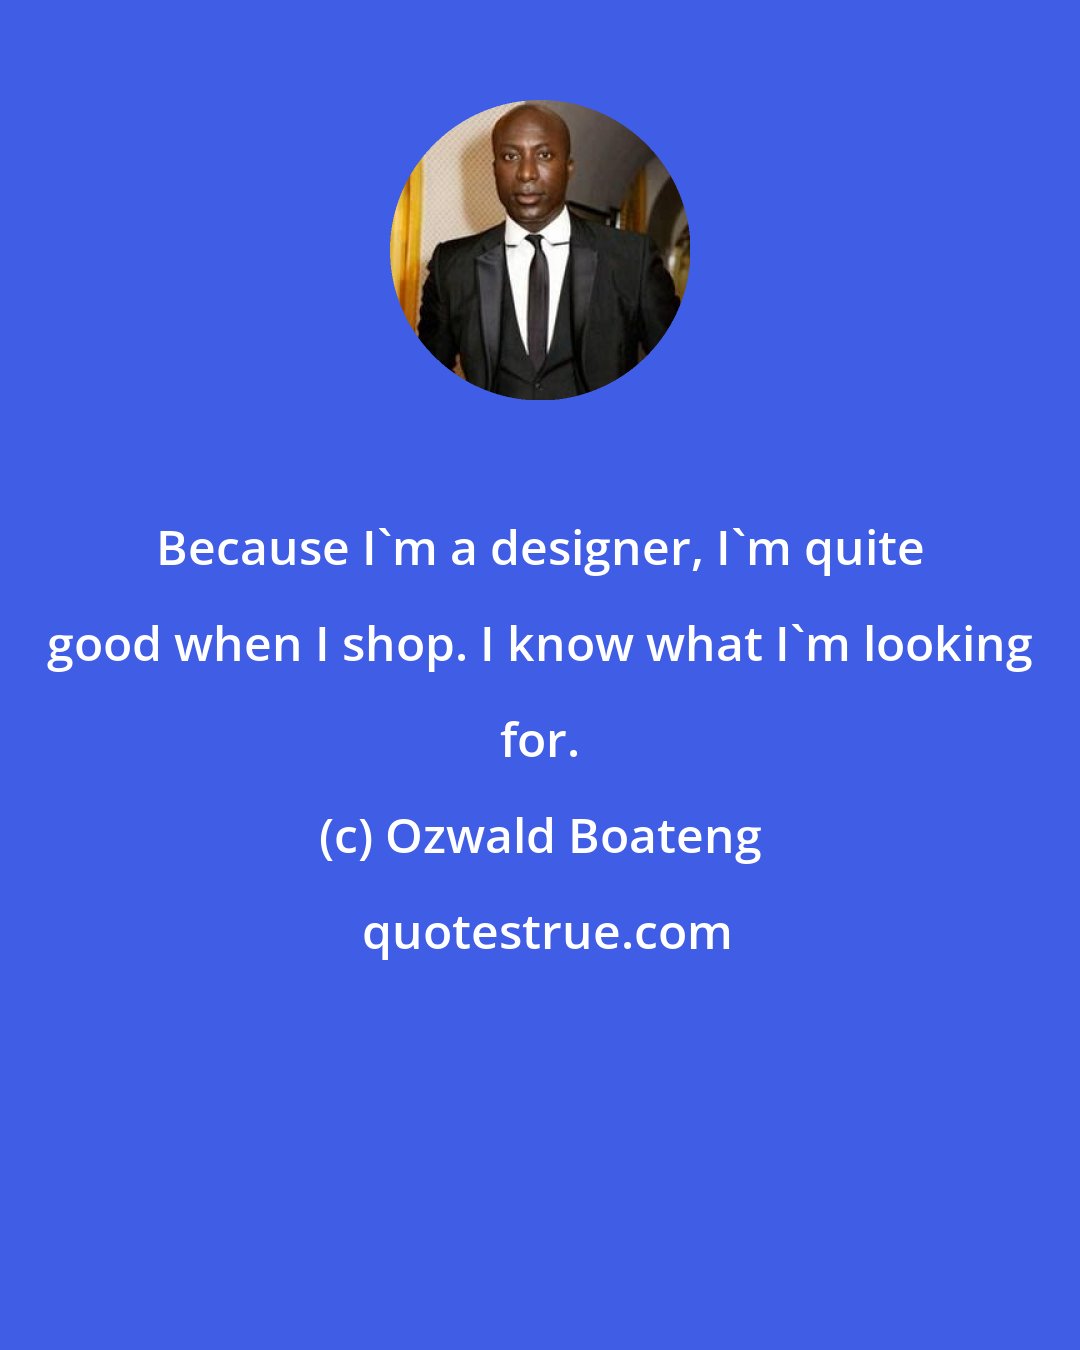 Ozwald Boateng: Because I'm a designer, I'm quite good when I shop. I know what I'm looking for.